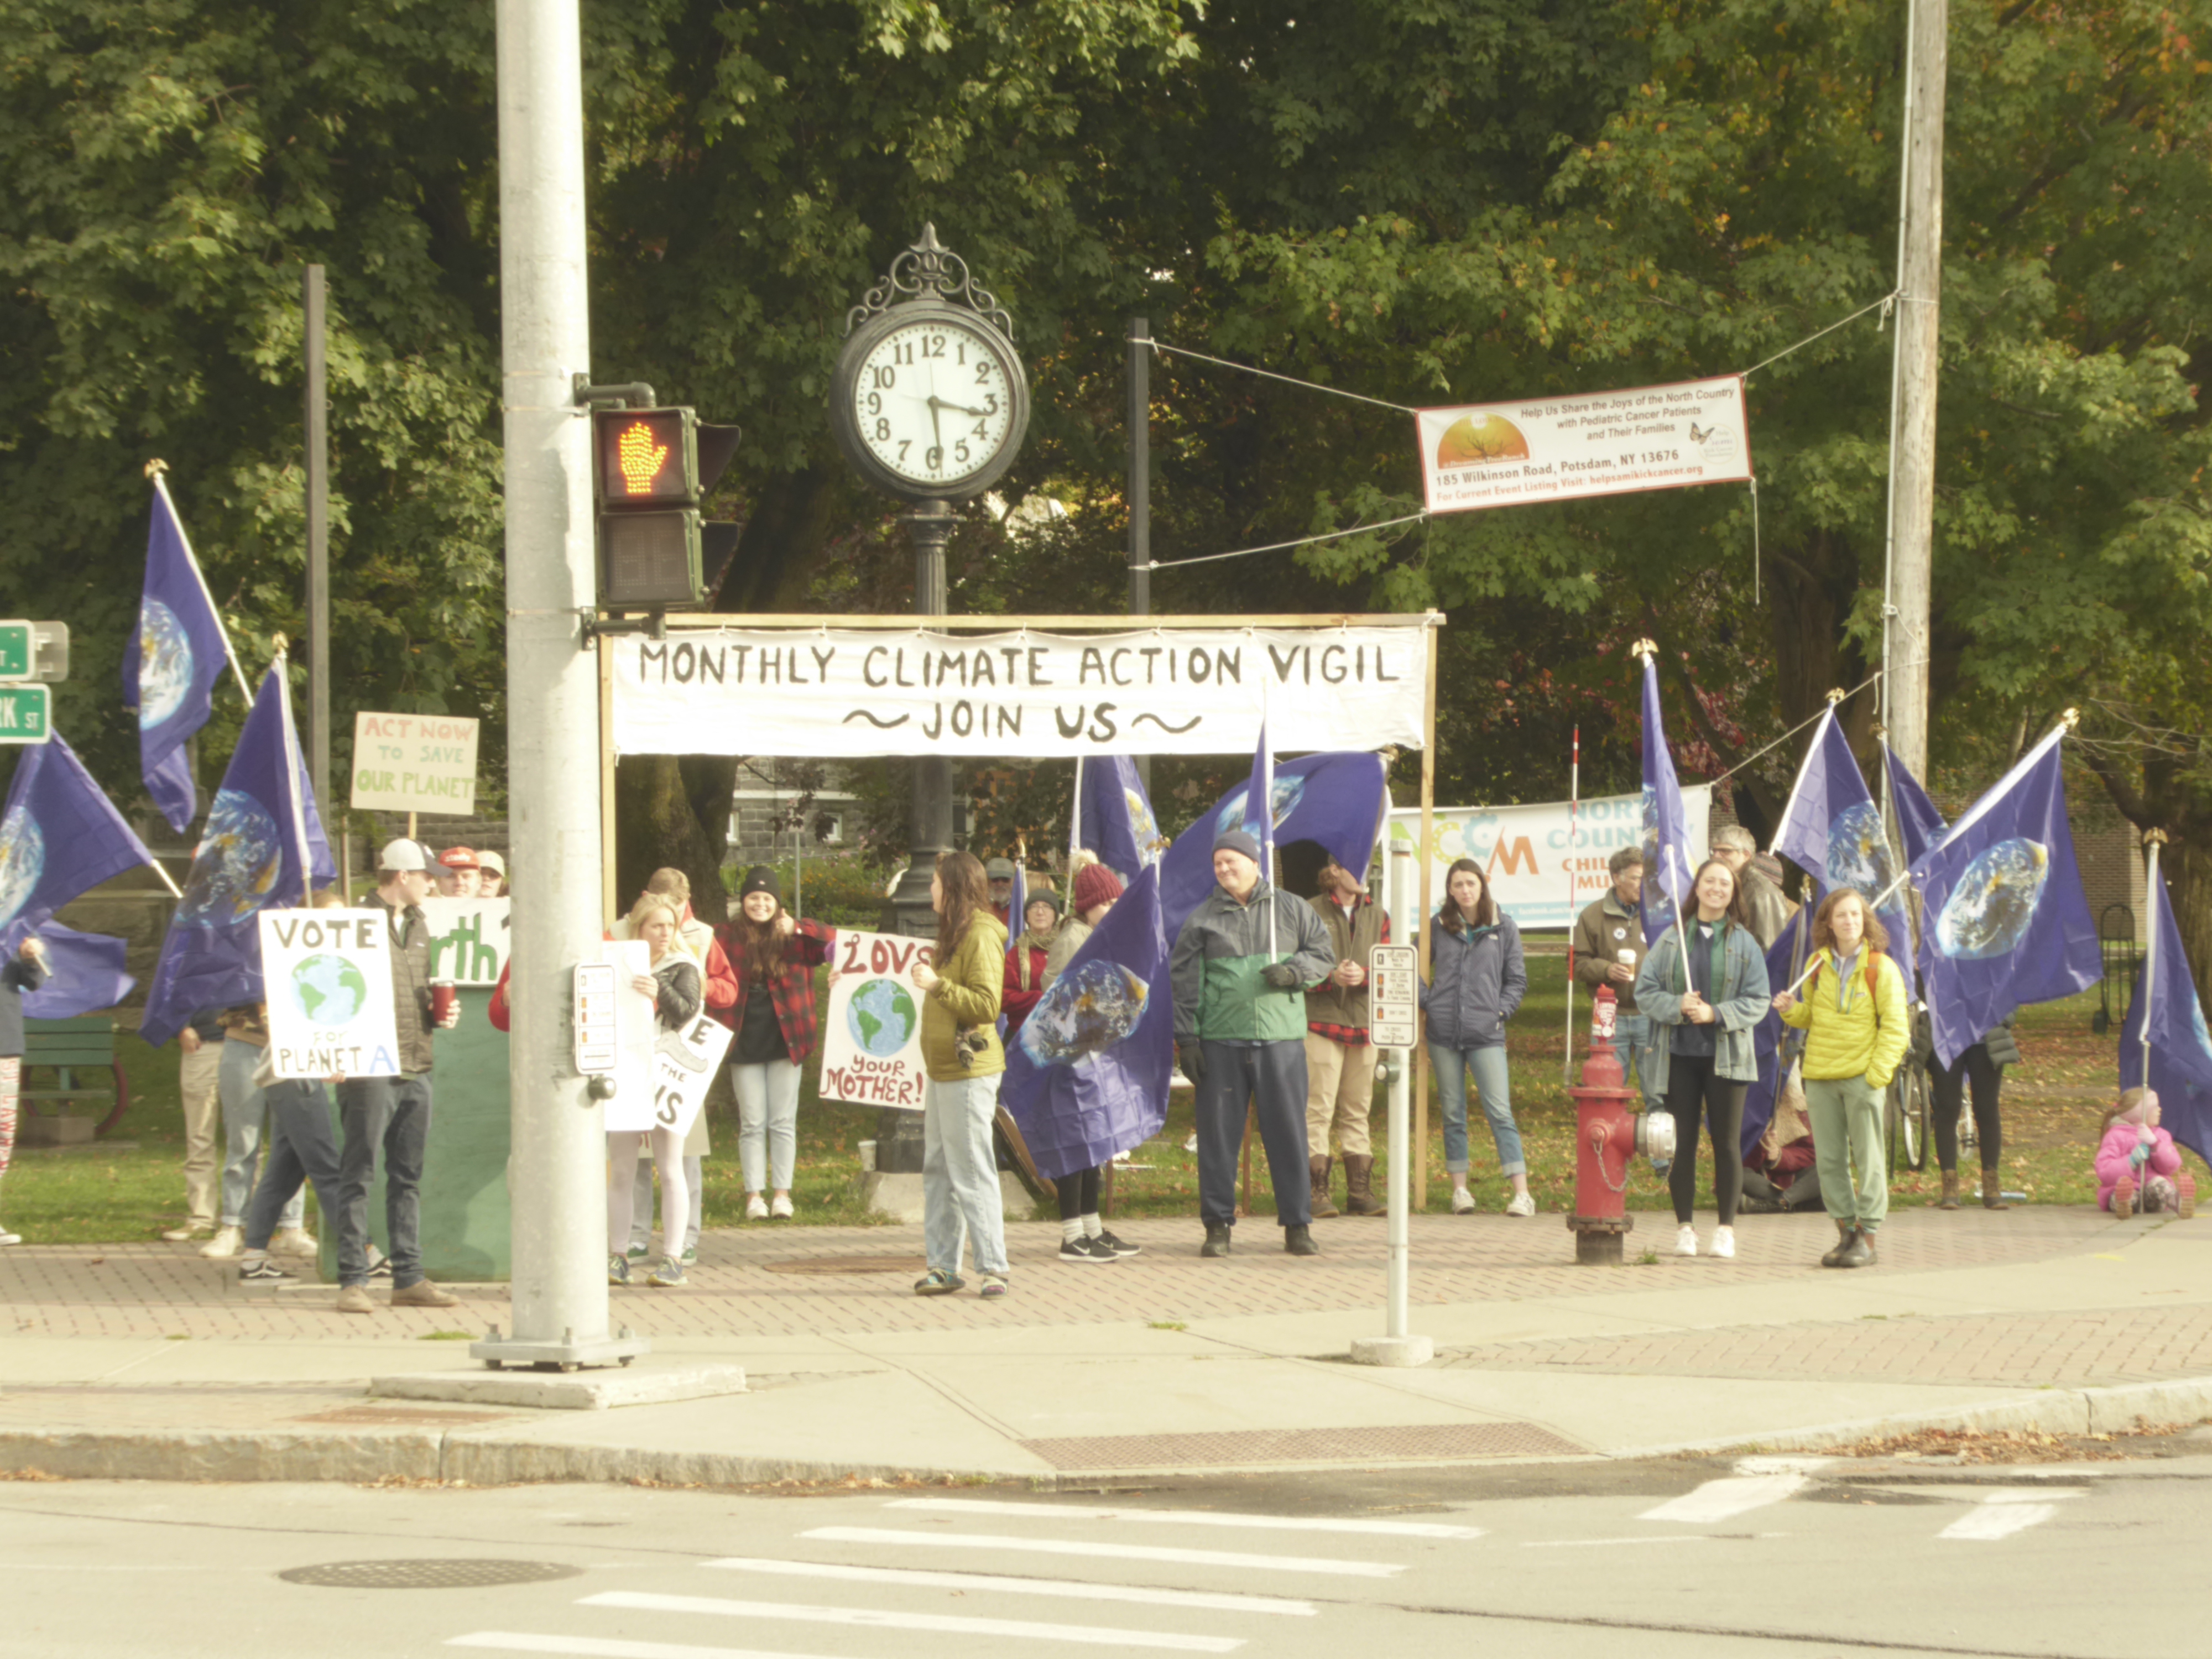 Protesters hold signs and flags at the climate vigil in Canton.